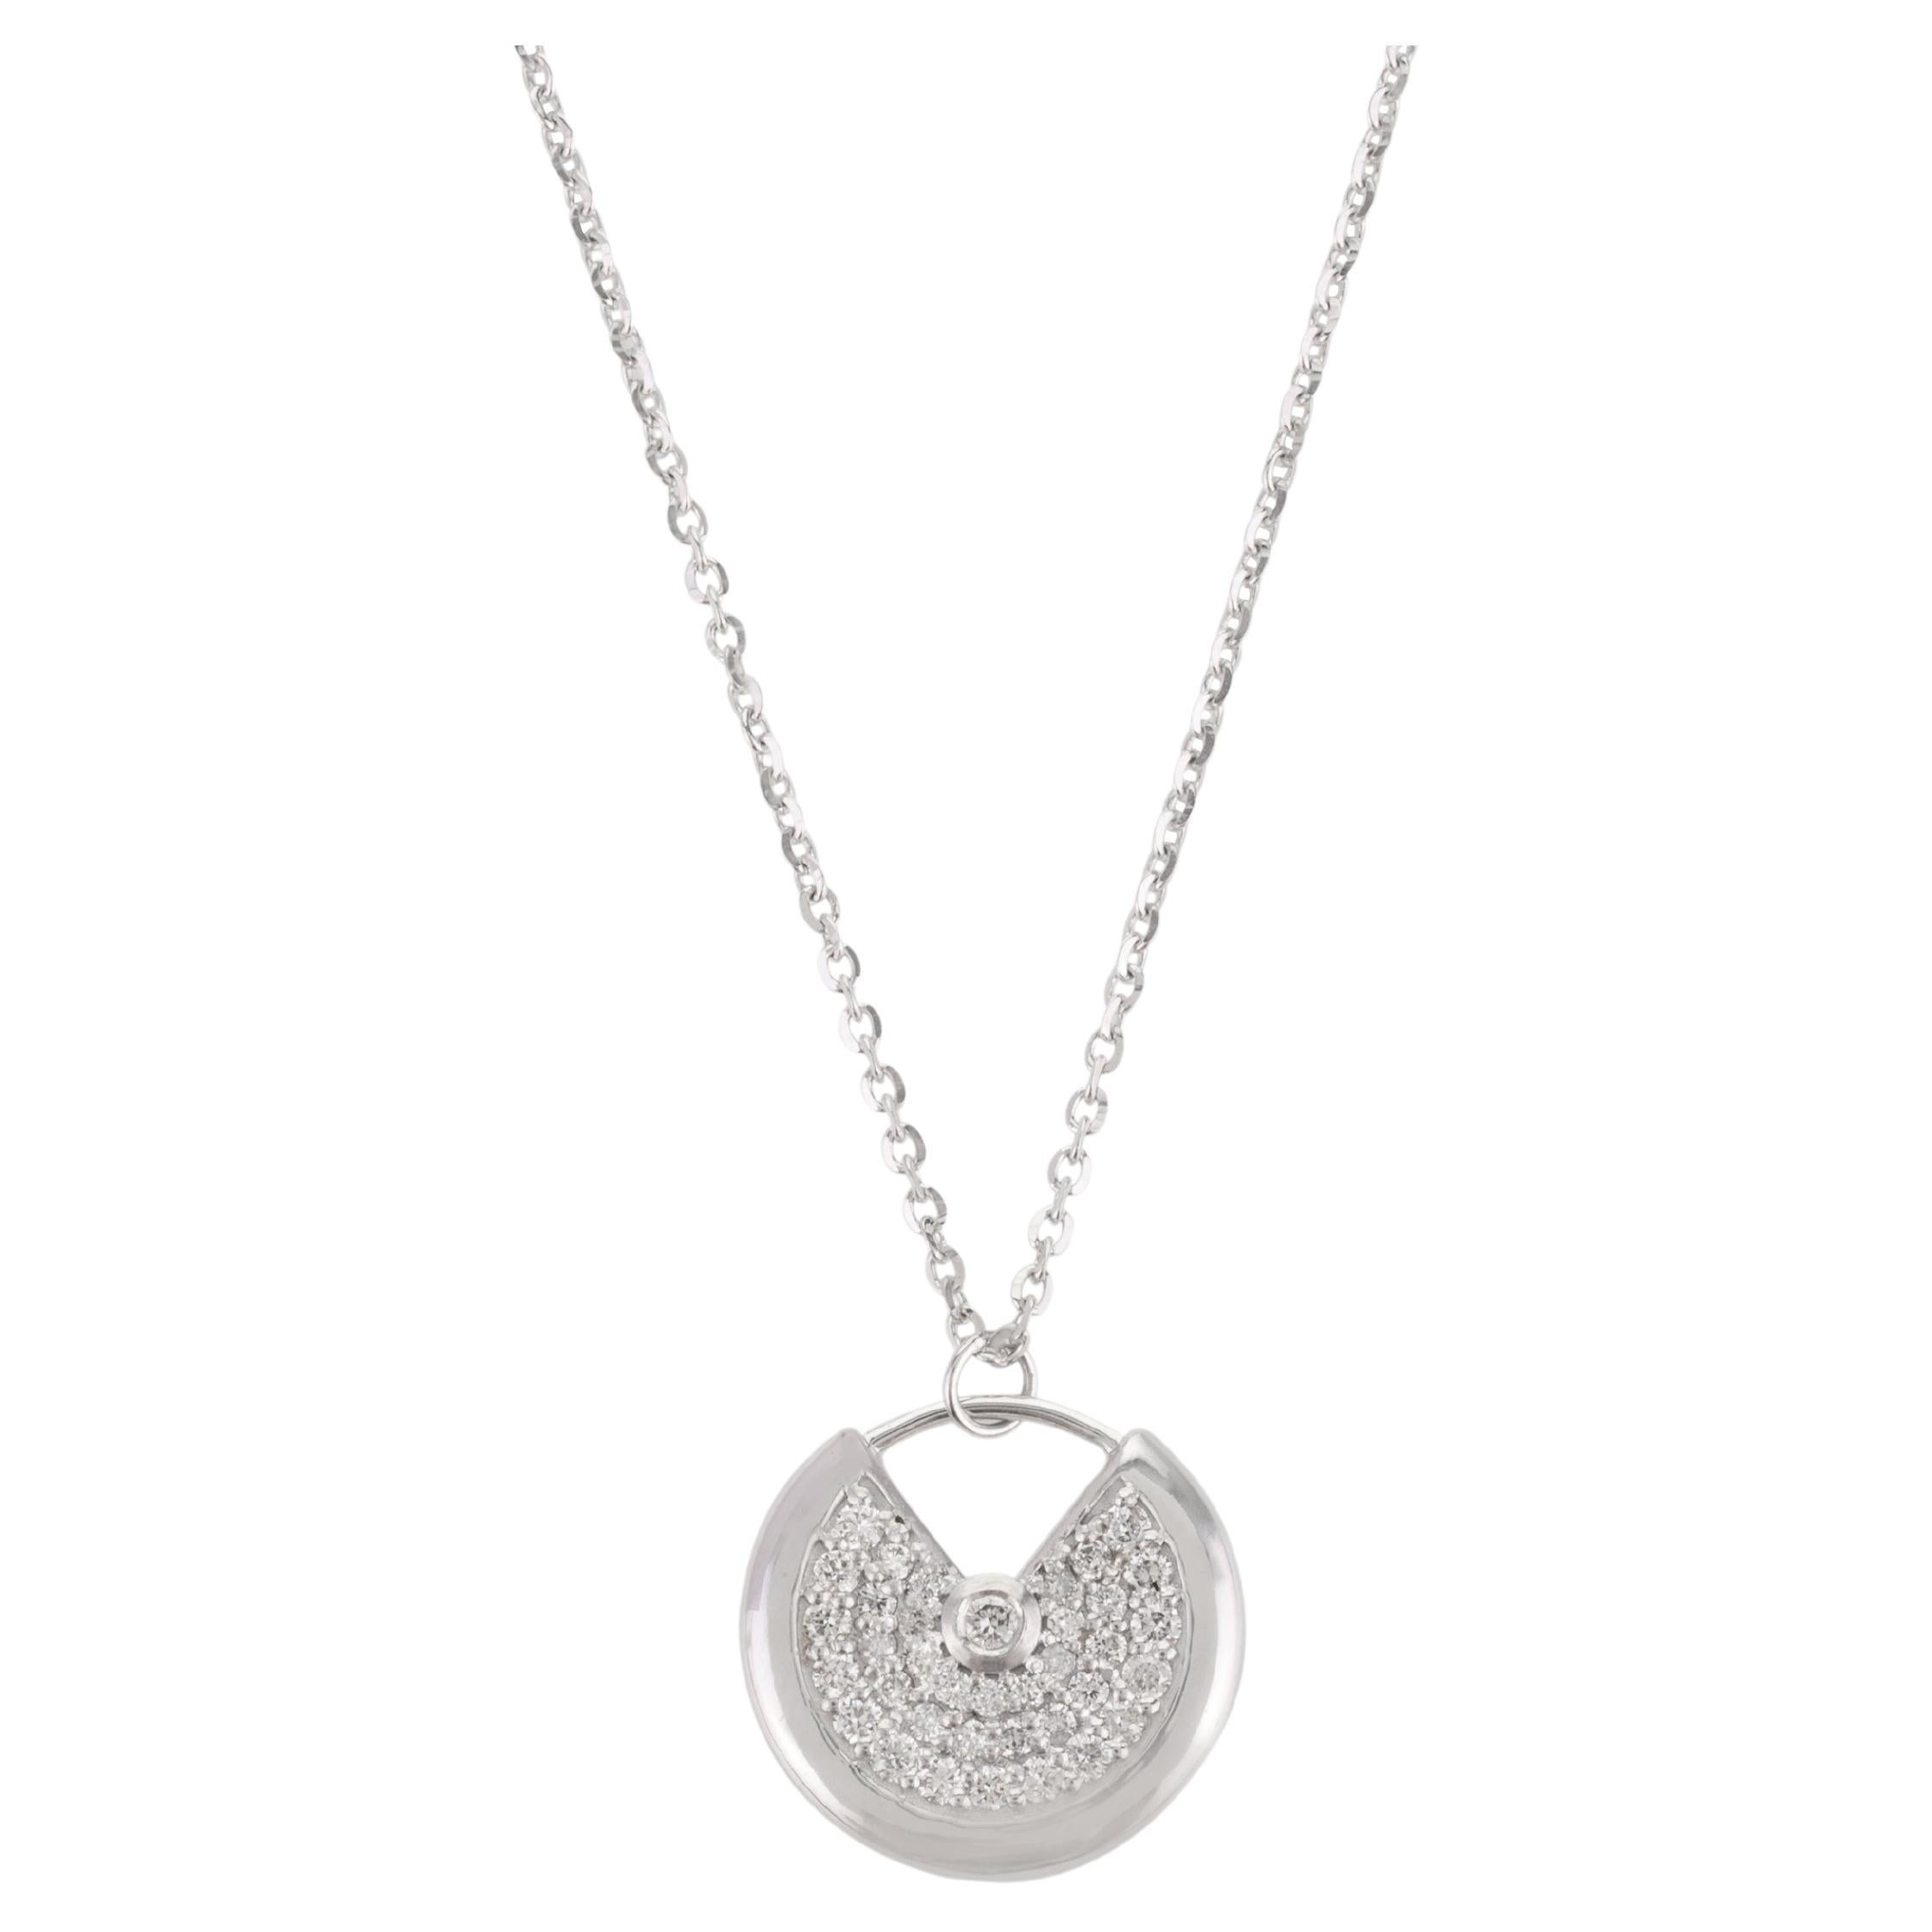 Real Diamond 14K Solid White Gold Elegant Disc Pendant Necklace for Her